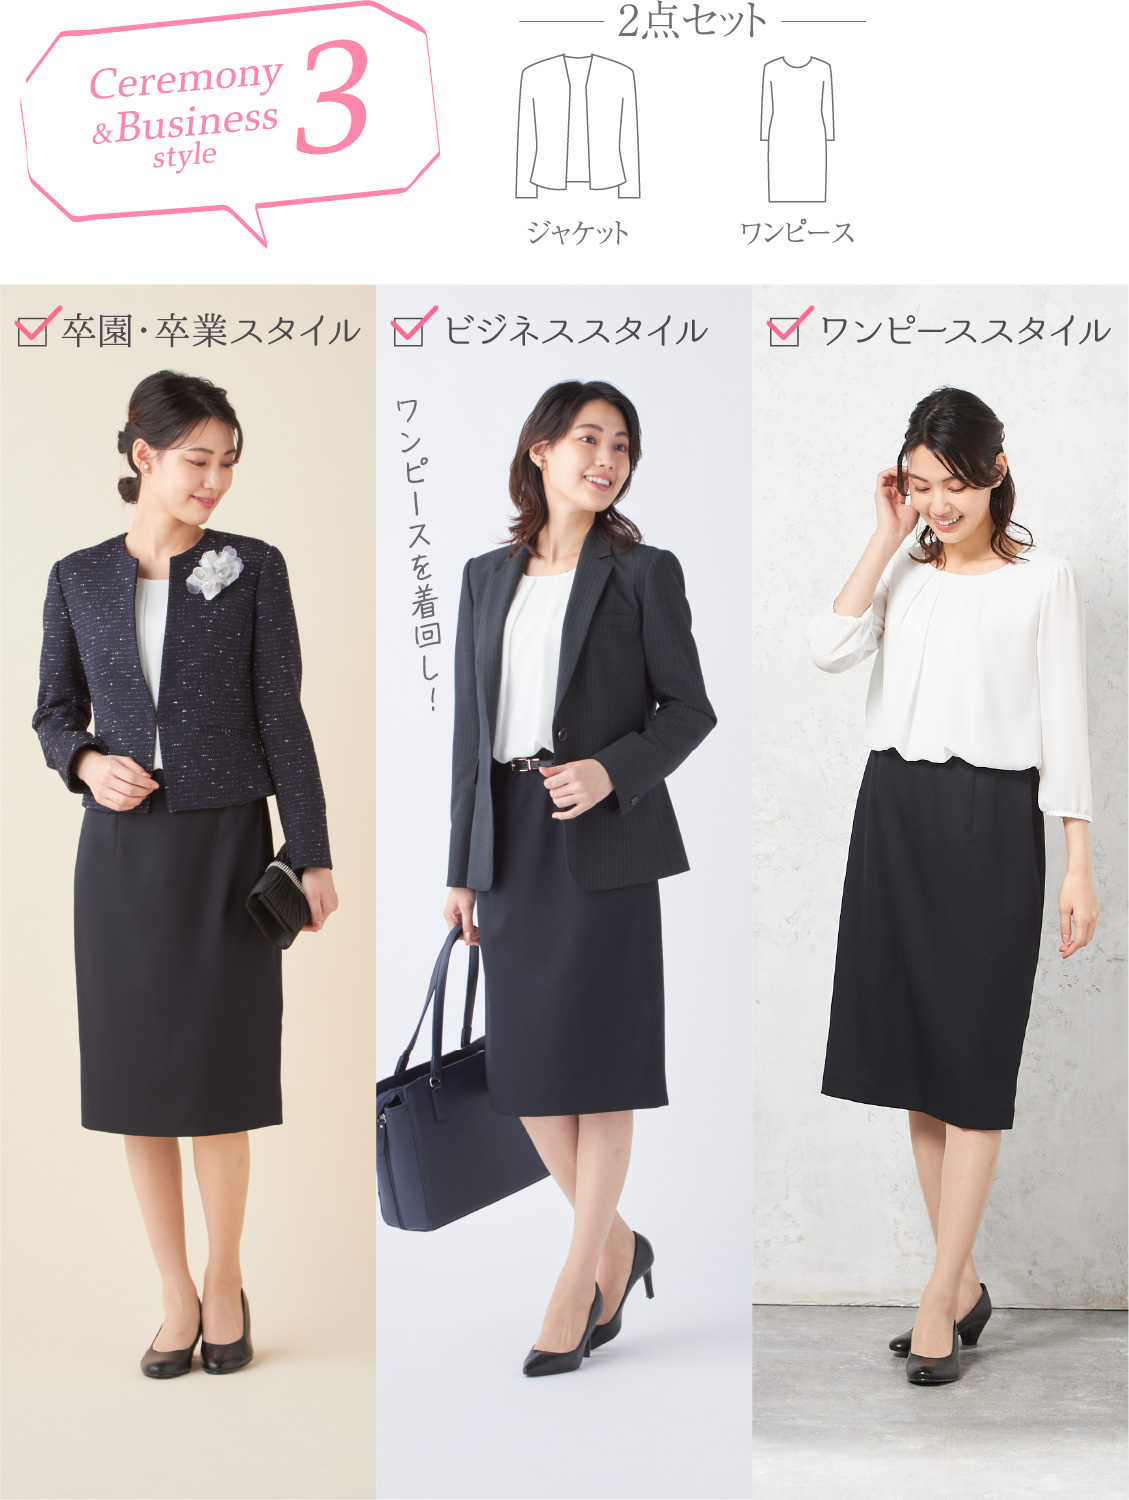 Ceremony&Business style 3